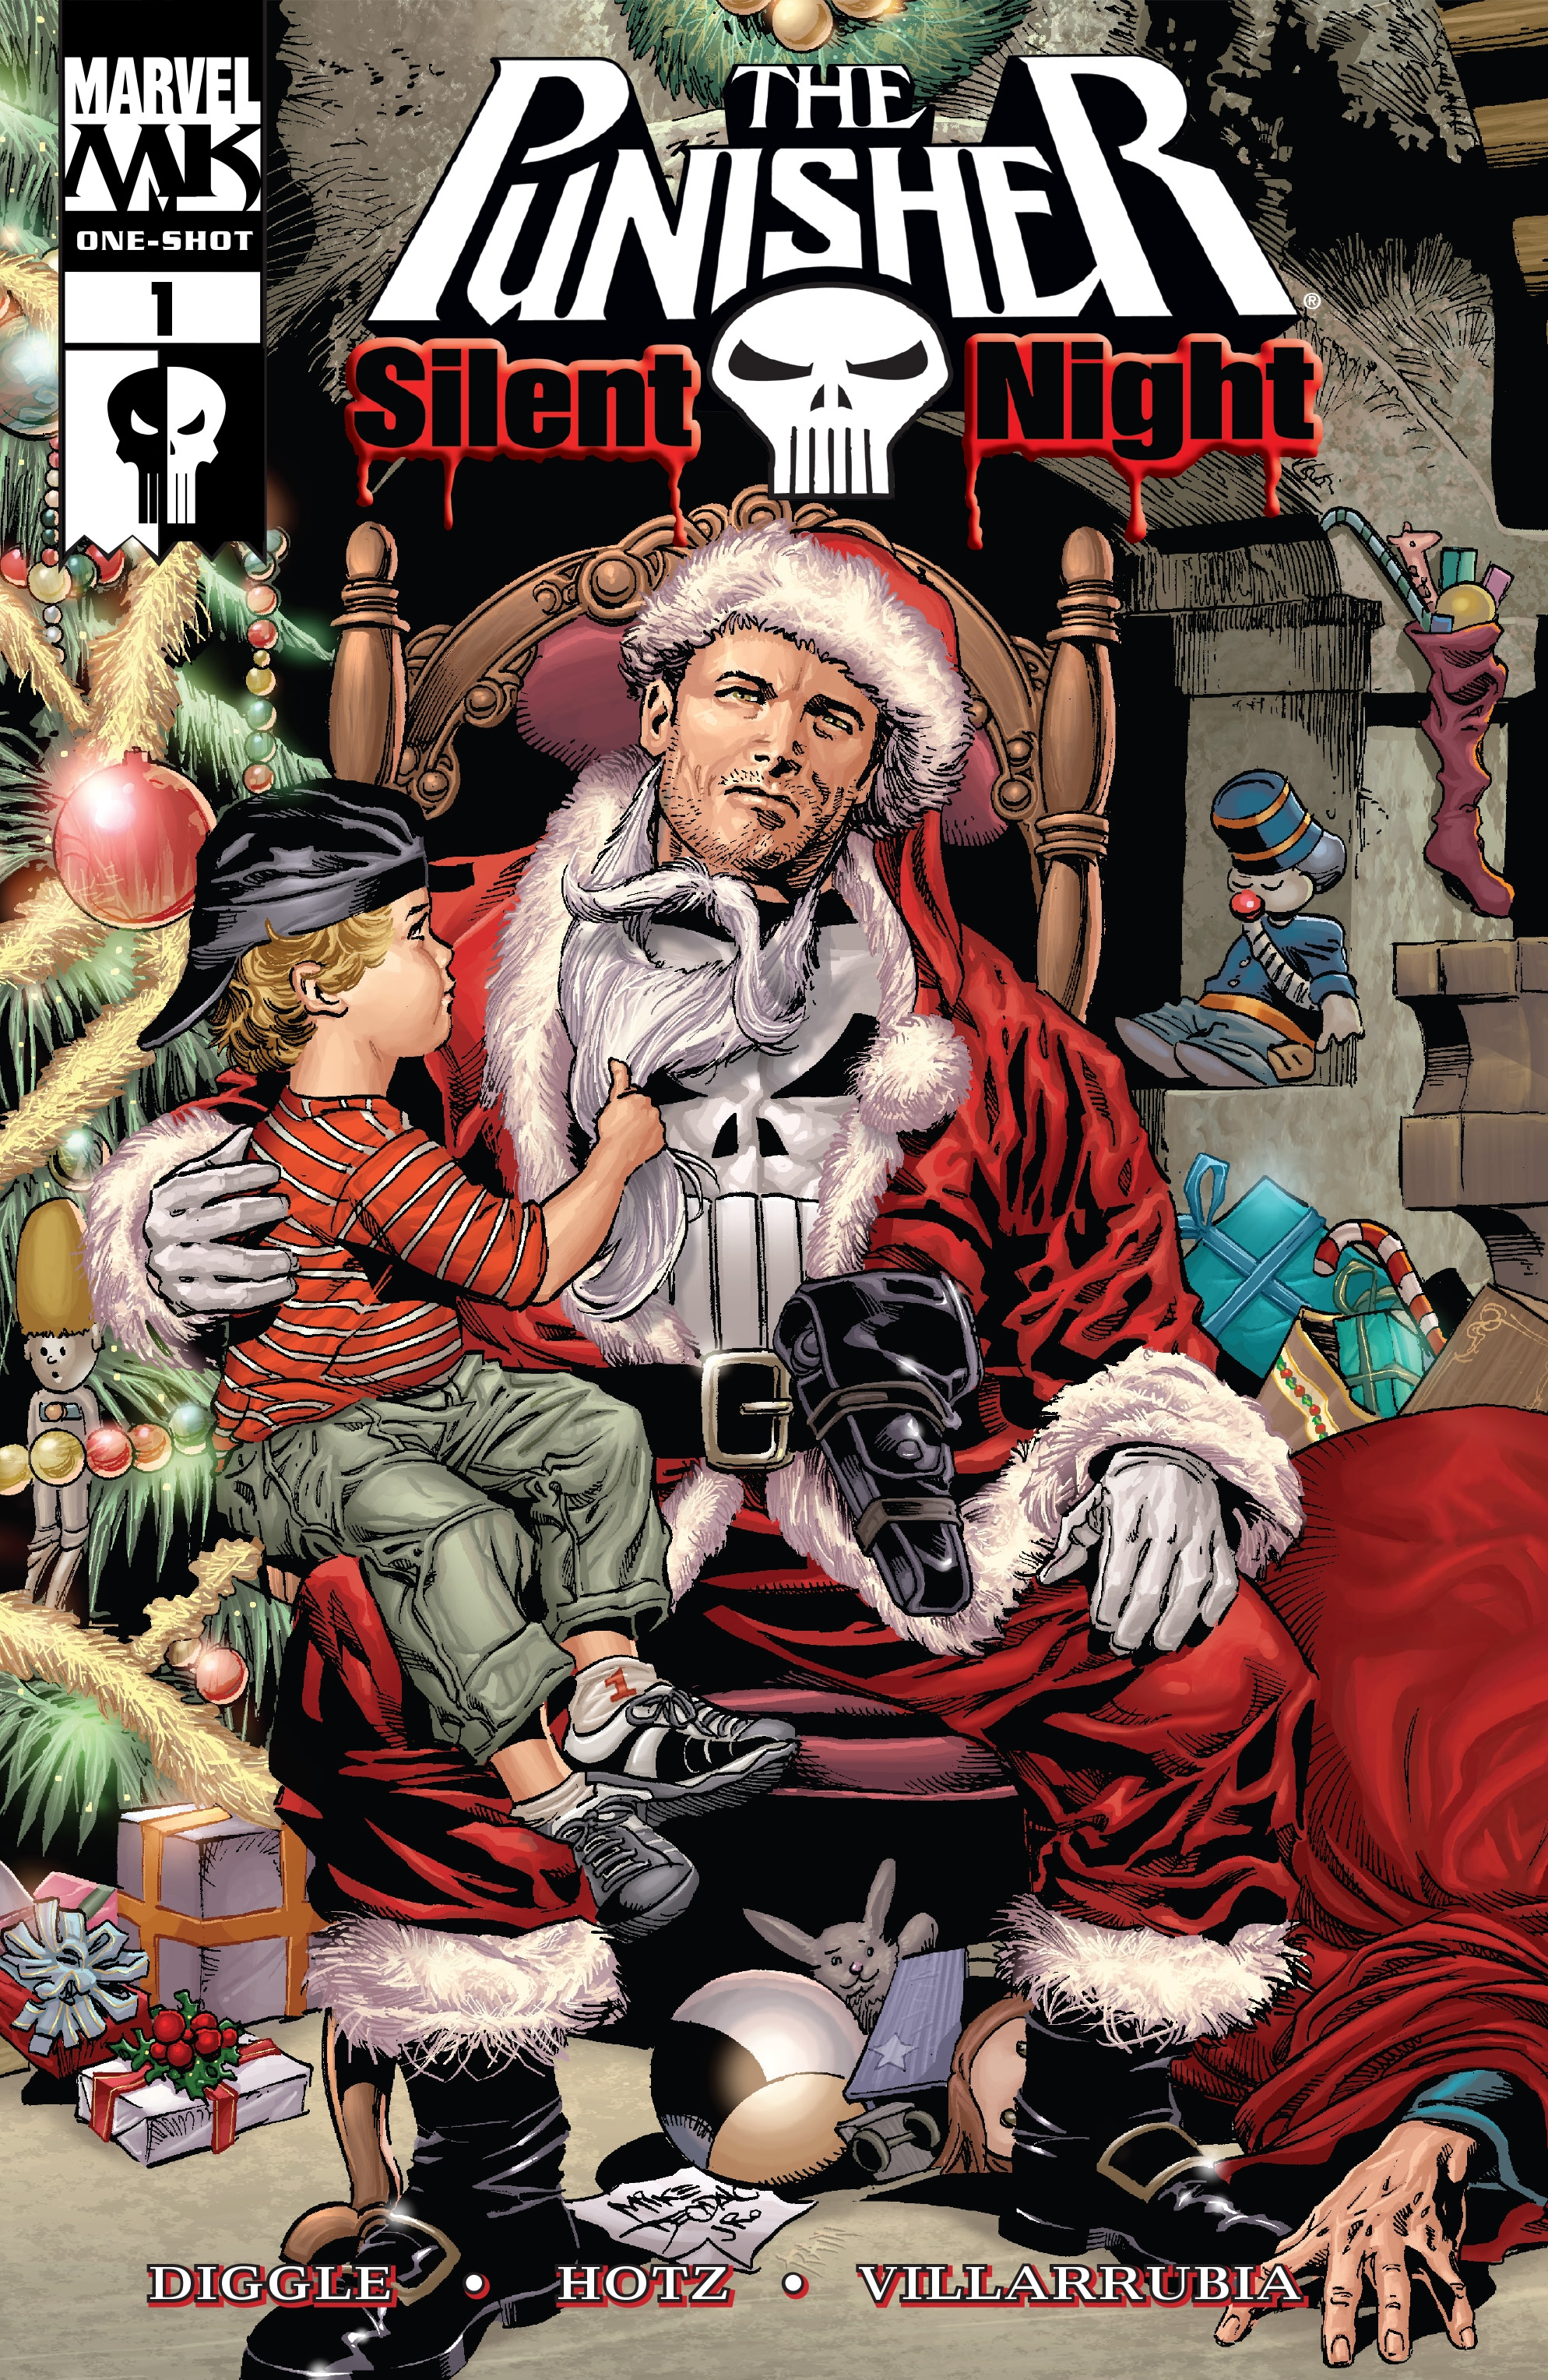 Read online Punisher: Silent Night comic -  Issue # Full - 1